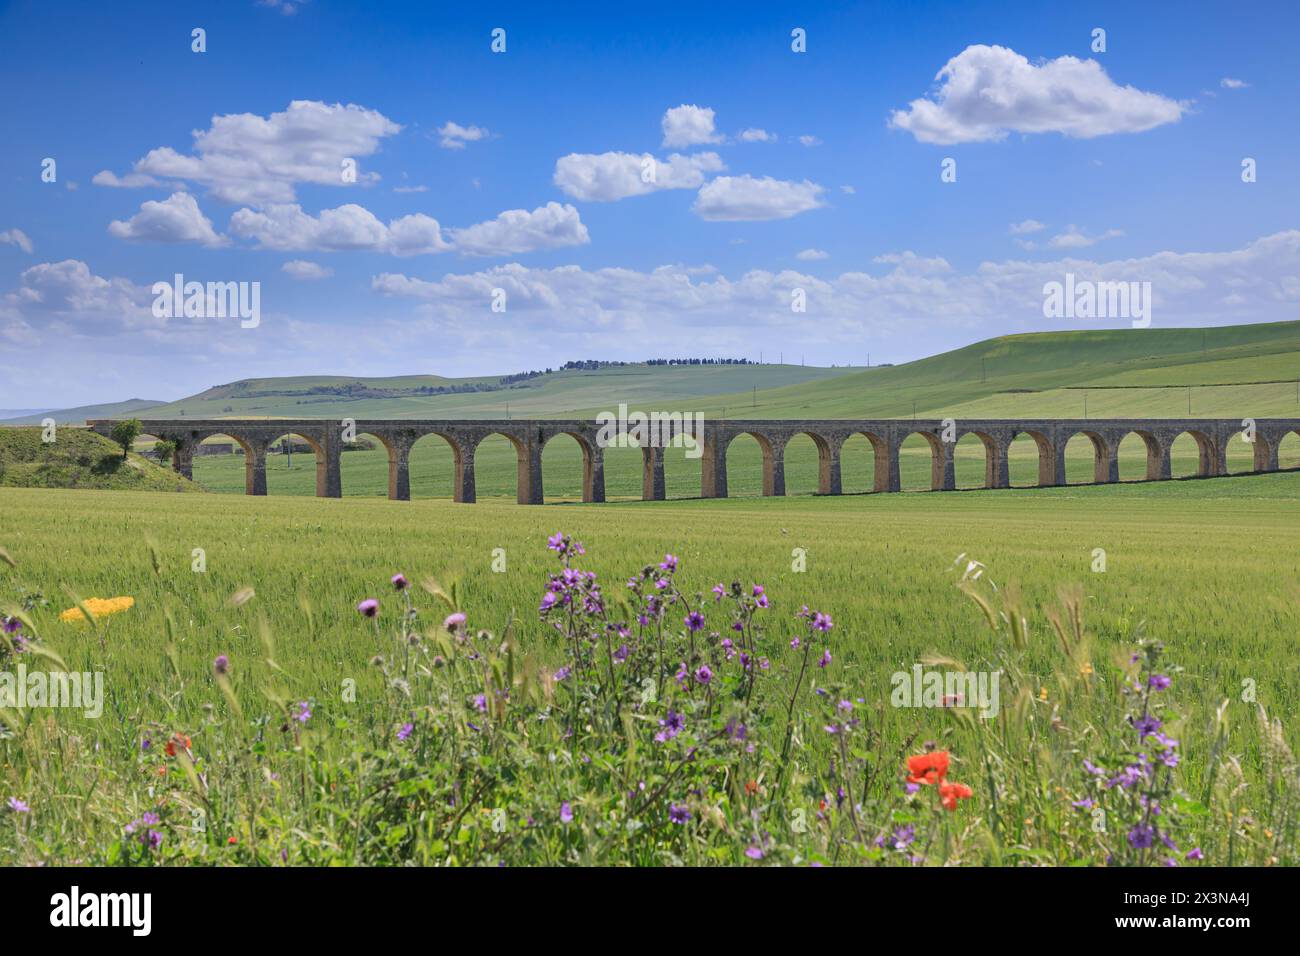 Springtime: hilly landscape with green wheat fields and viaduct. View of the Bridge of 21 Arches, the ghost railway bridge near Spinazzola town. Stock Photo